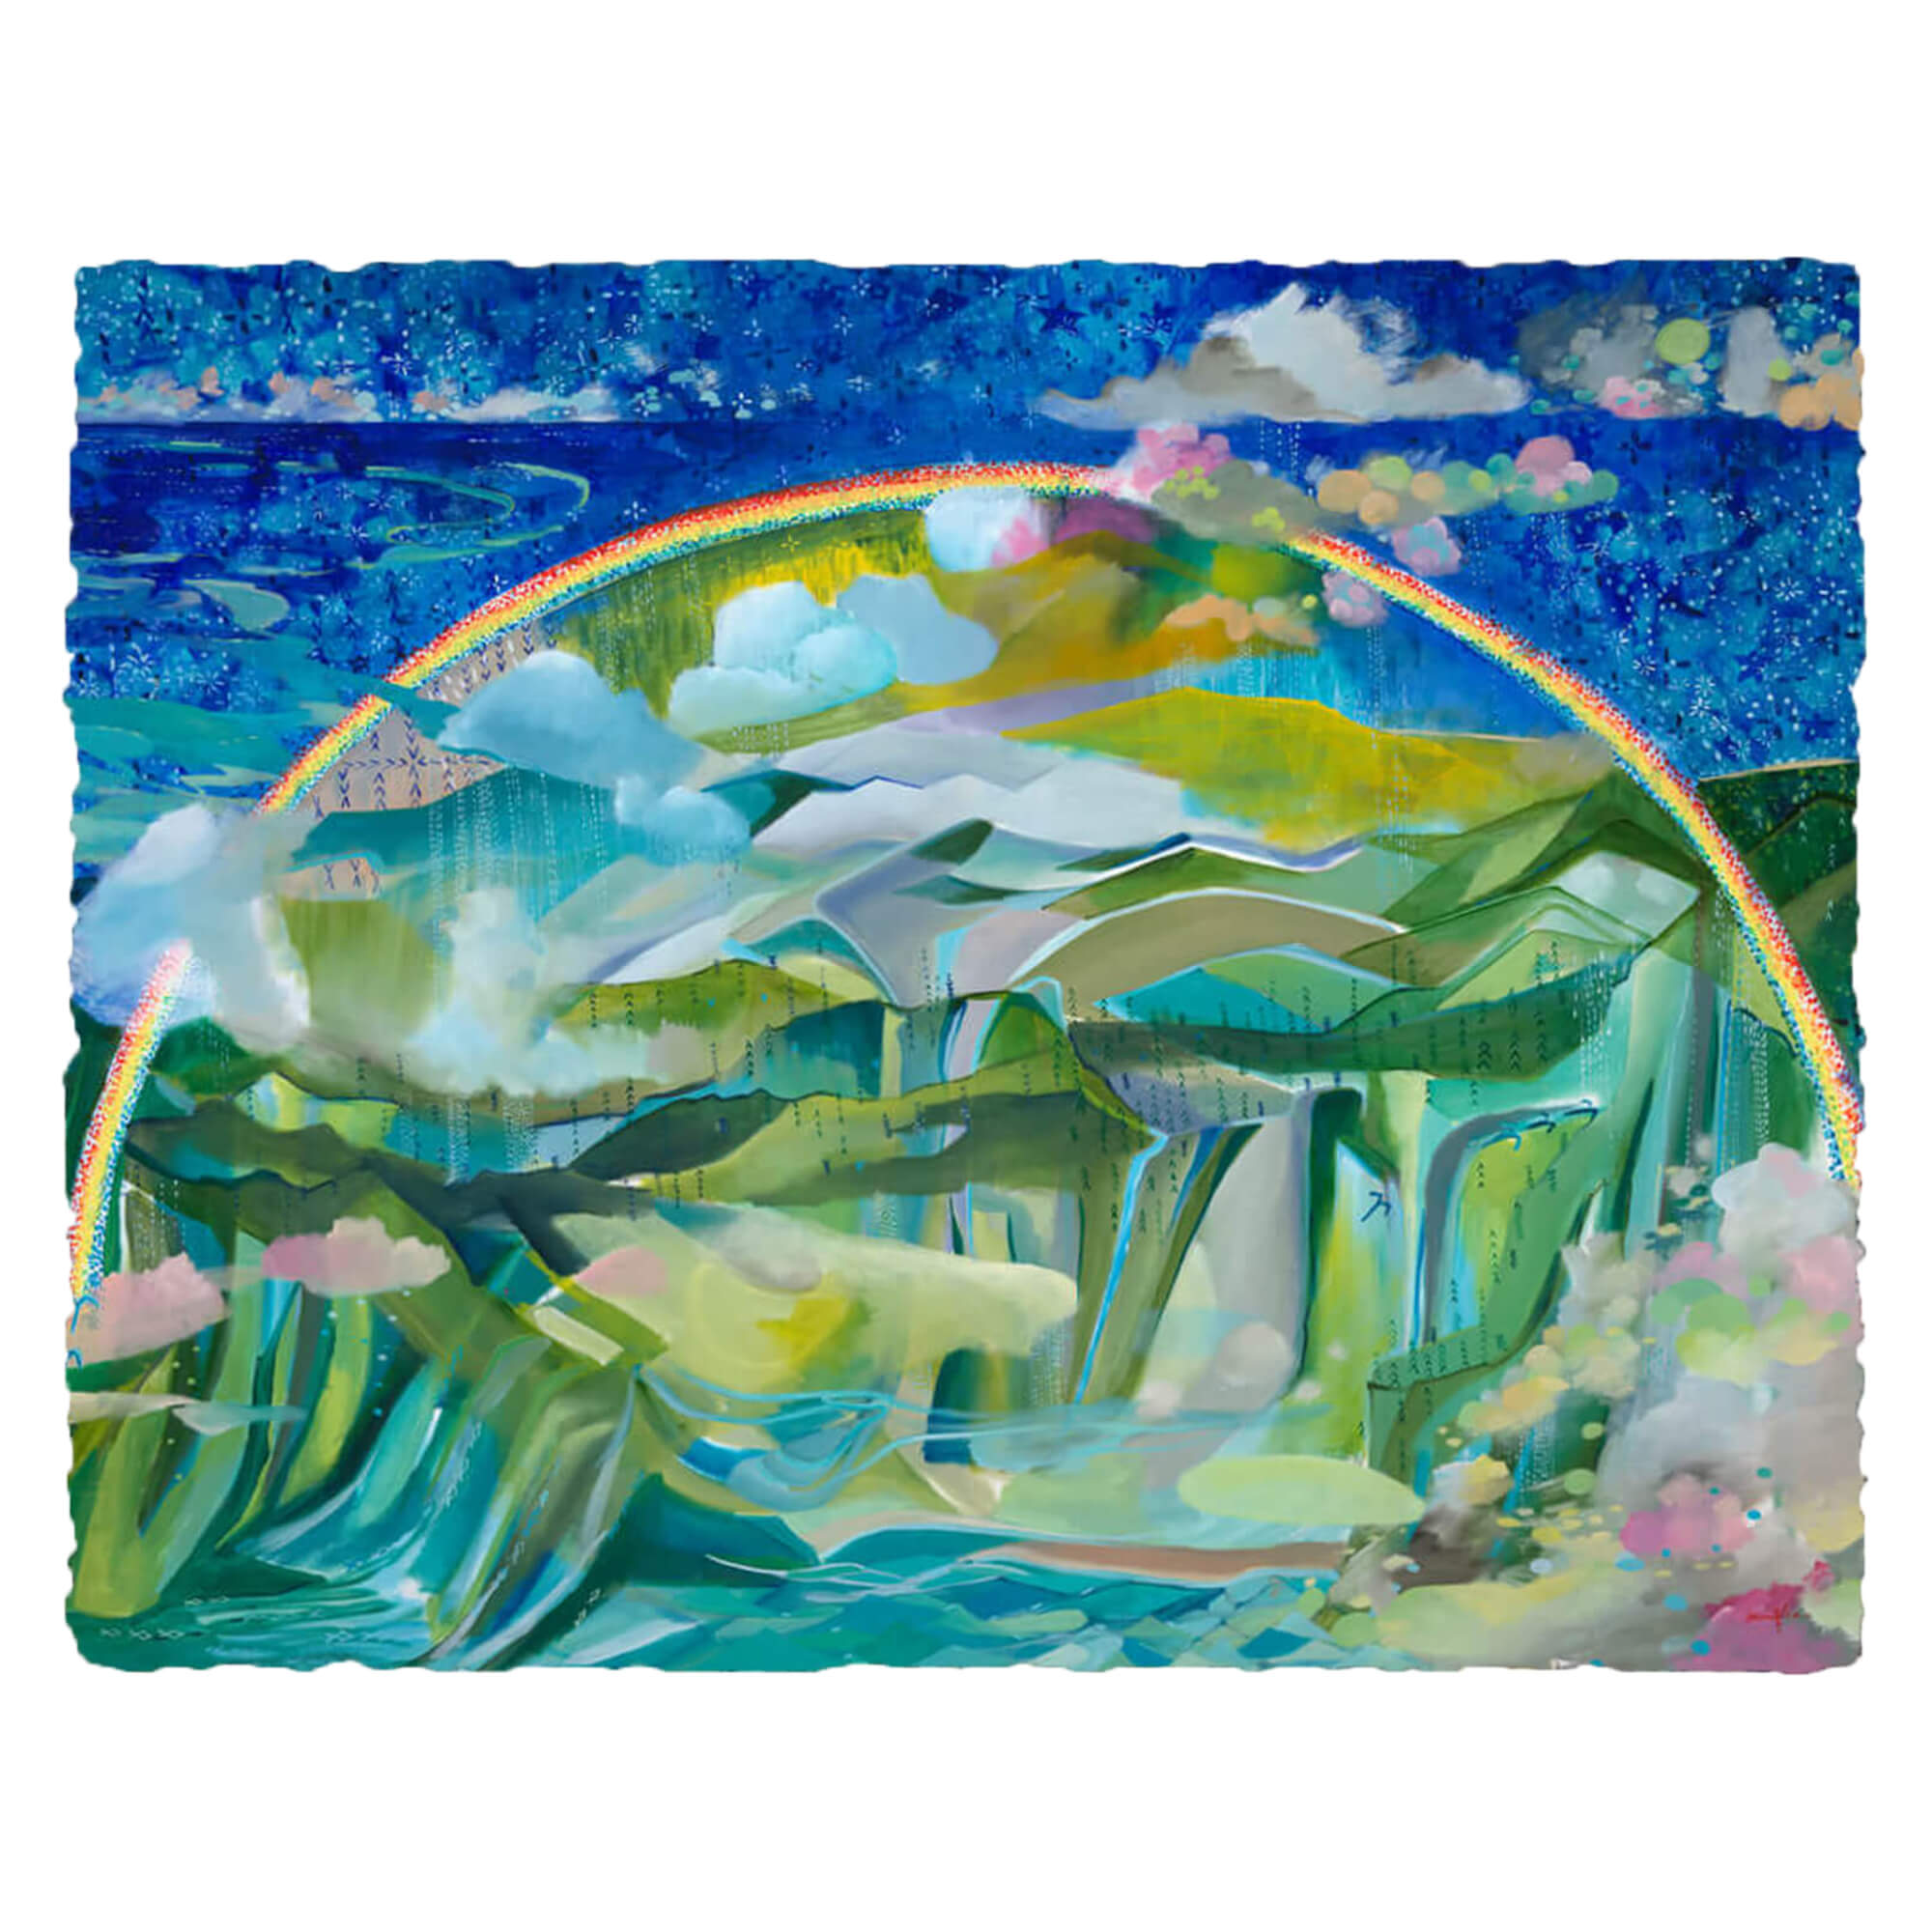 A deckled paper art print of an abstract landscape with a rainbow over the mountains by Hawaii artist Saumolia Puapuaga